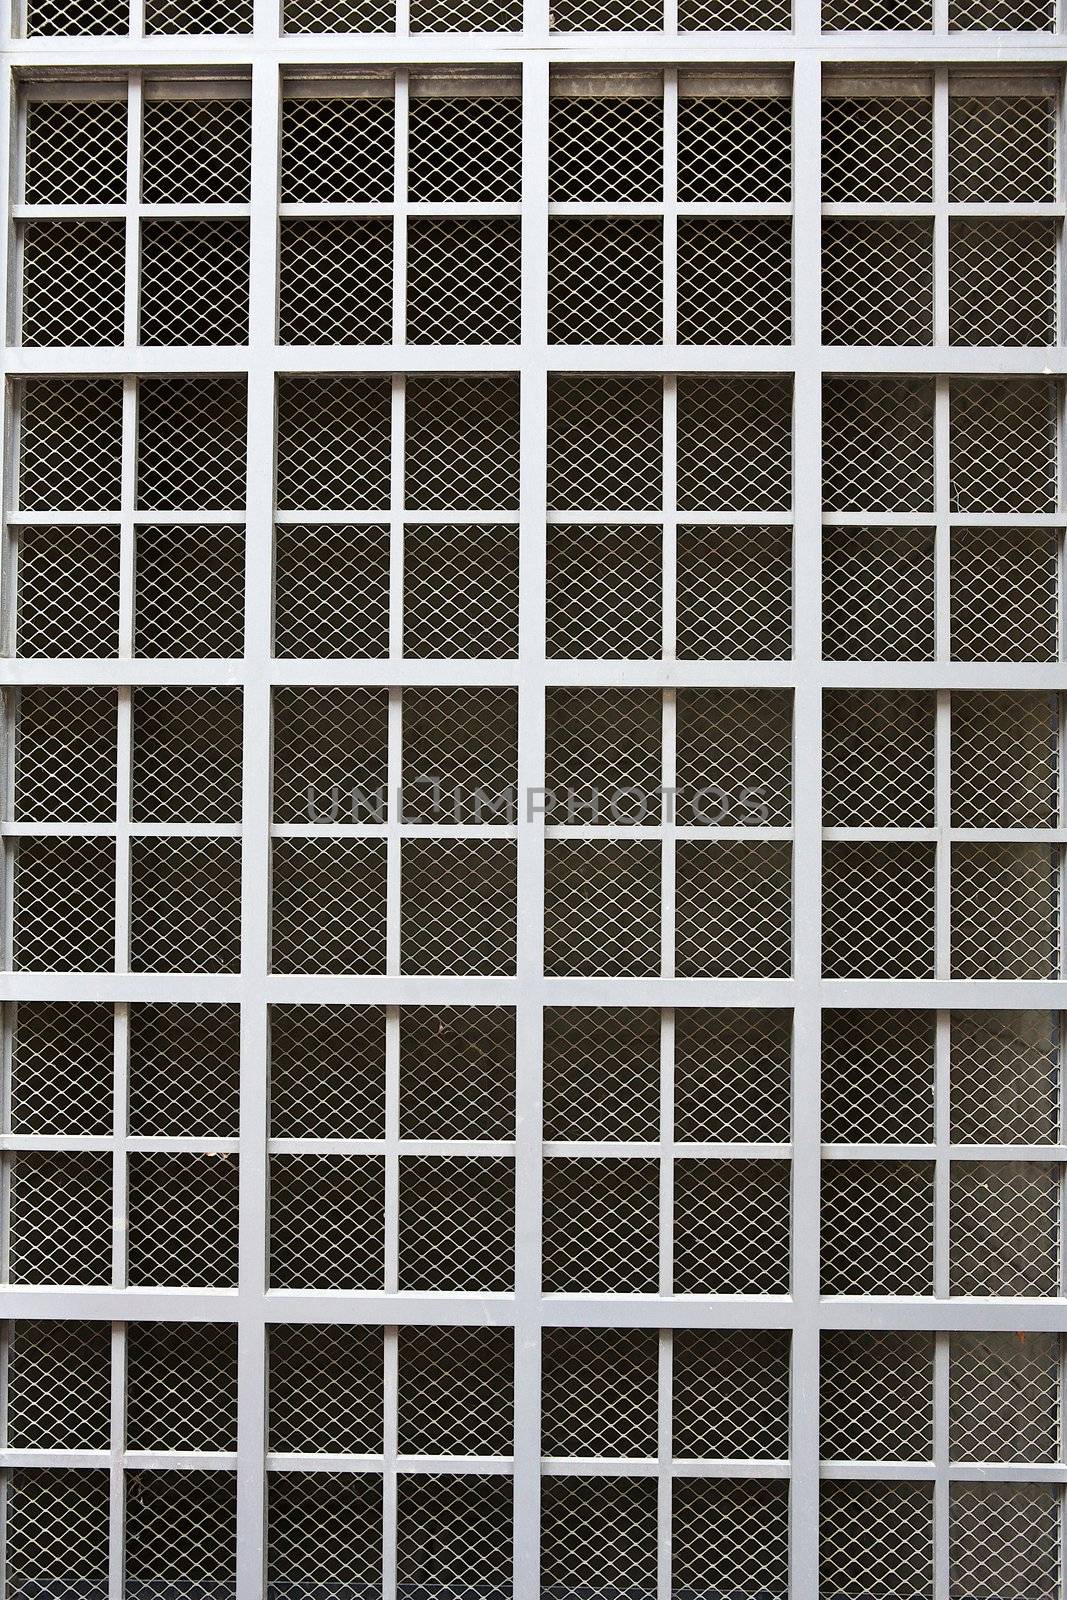 Dull silver color metal bars over screen covering building window